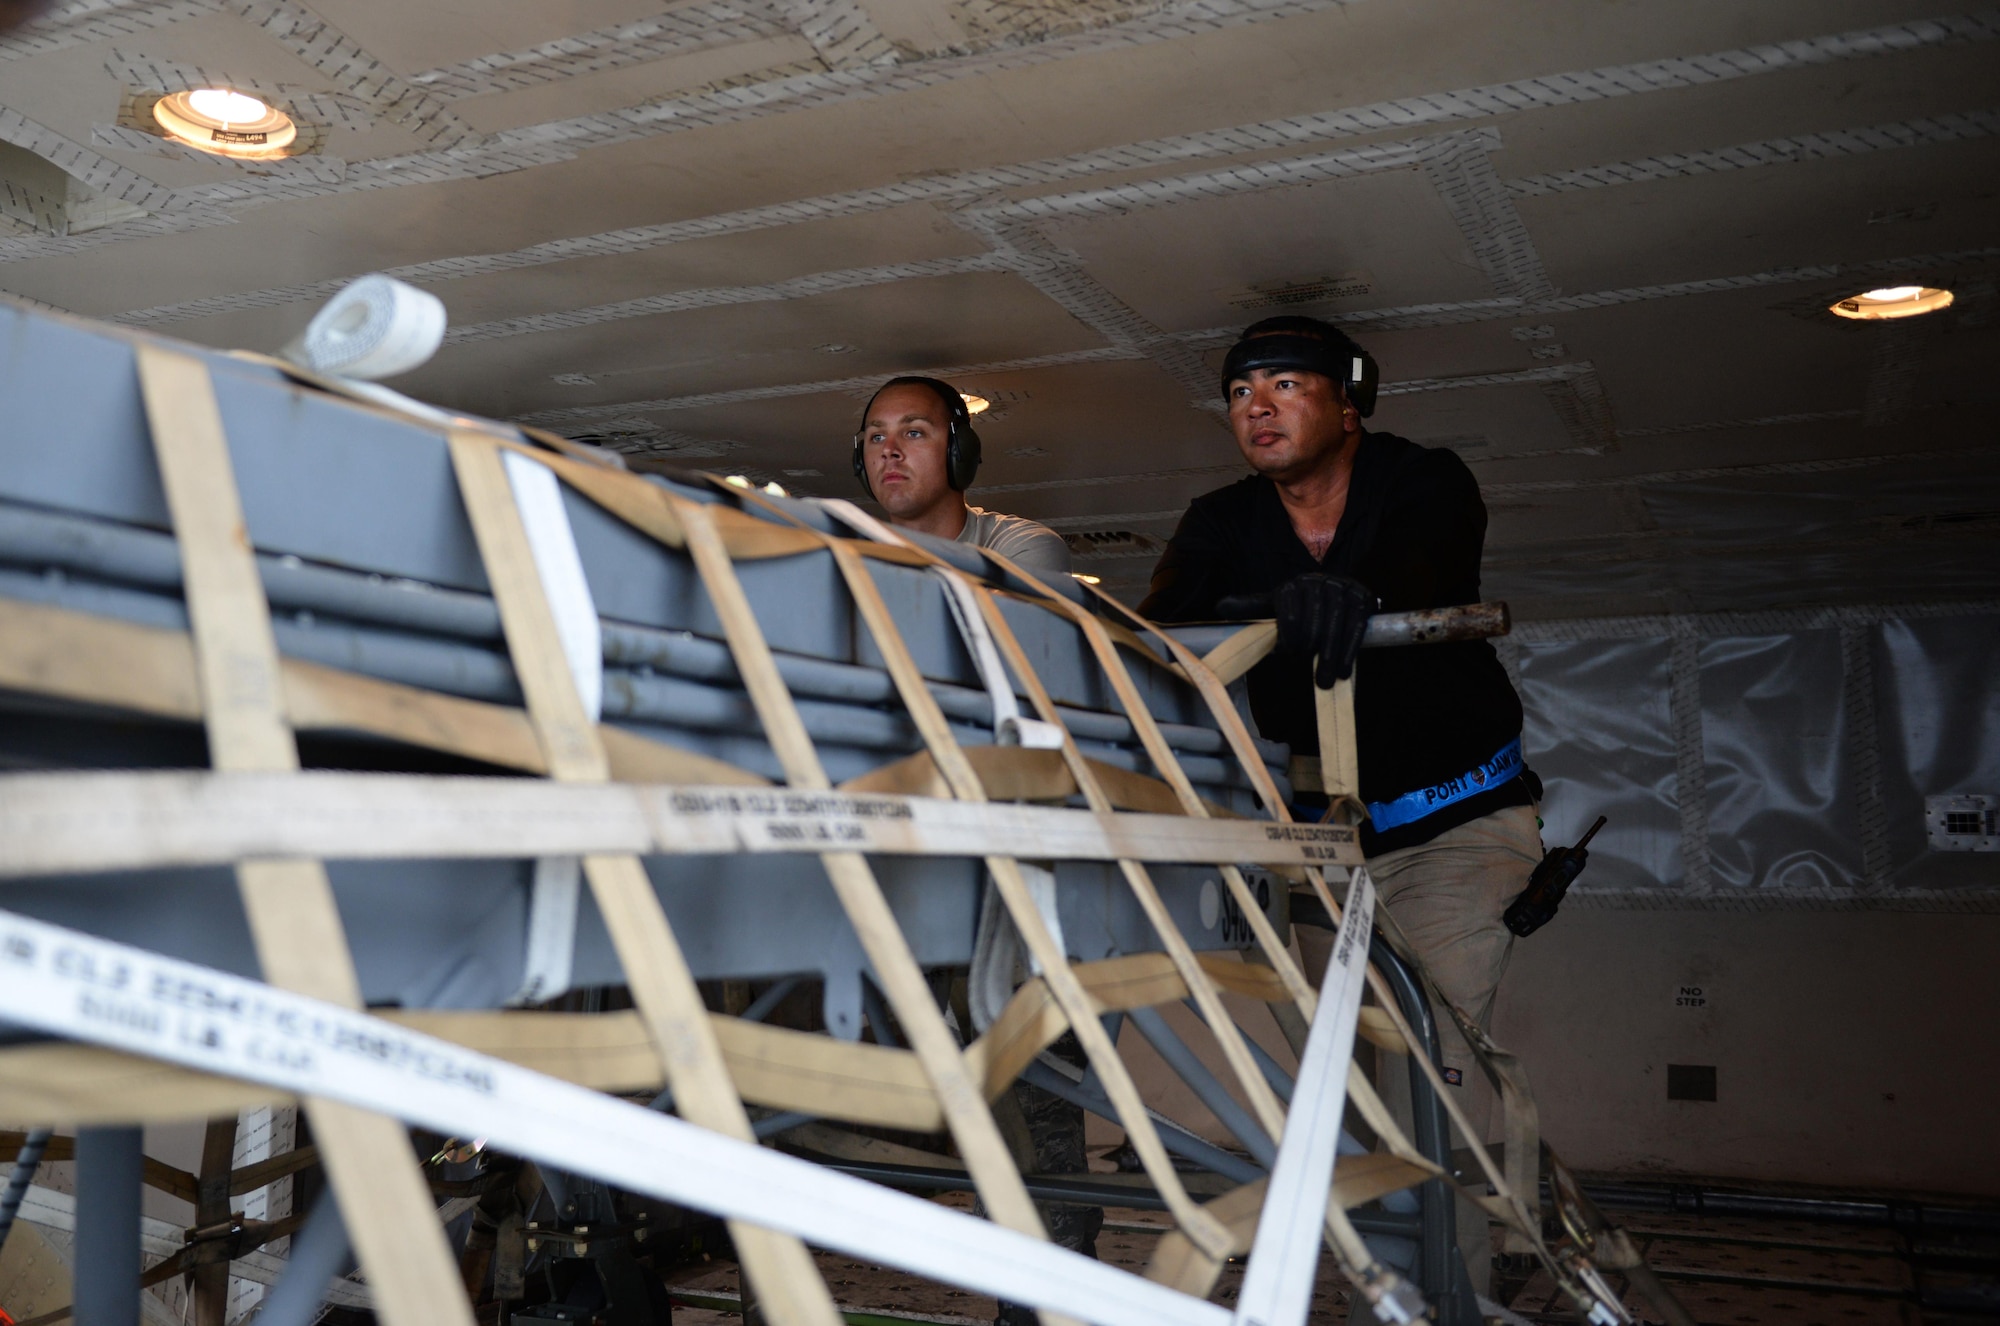 Airman 1st Class Matthew Carpenter, left, 44th Air Maintenance Unit crew chief, and Fred San Nicolas, 734th Air Mobility Squadron load team chief, push an aircraft pallet Sept. 7, 2016, at Andersen Air Force Base, Guam. The 734th provides high velocity transportation of equipment, household goods, weapon systems and other essential cargo. (U.S. Air Force photo by Airman 1st Class Jacob Skovo)
